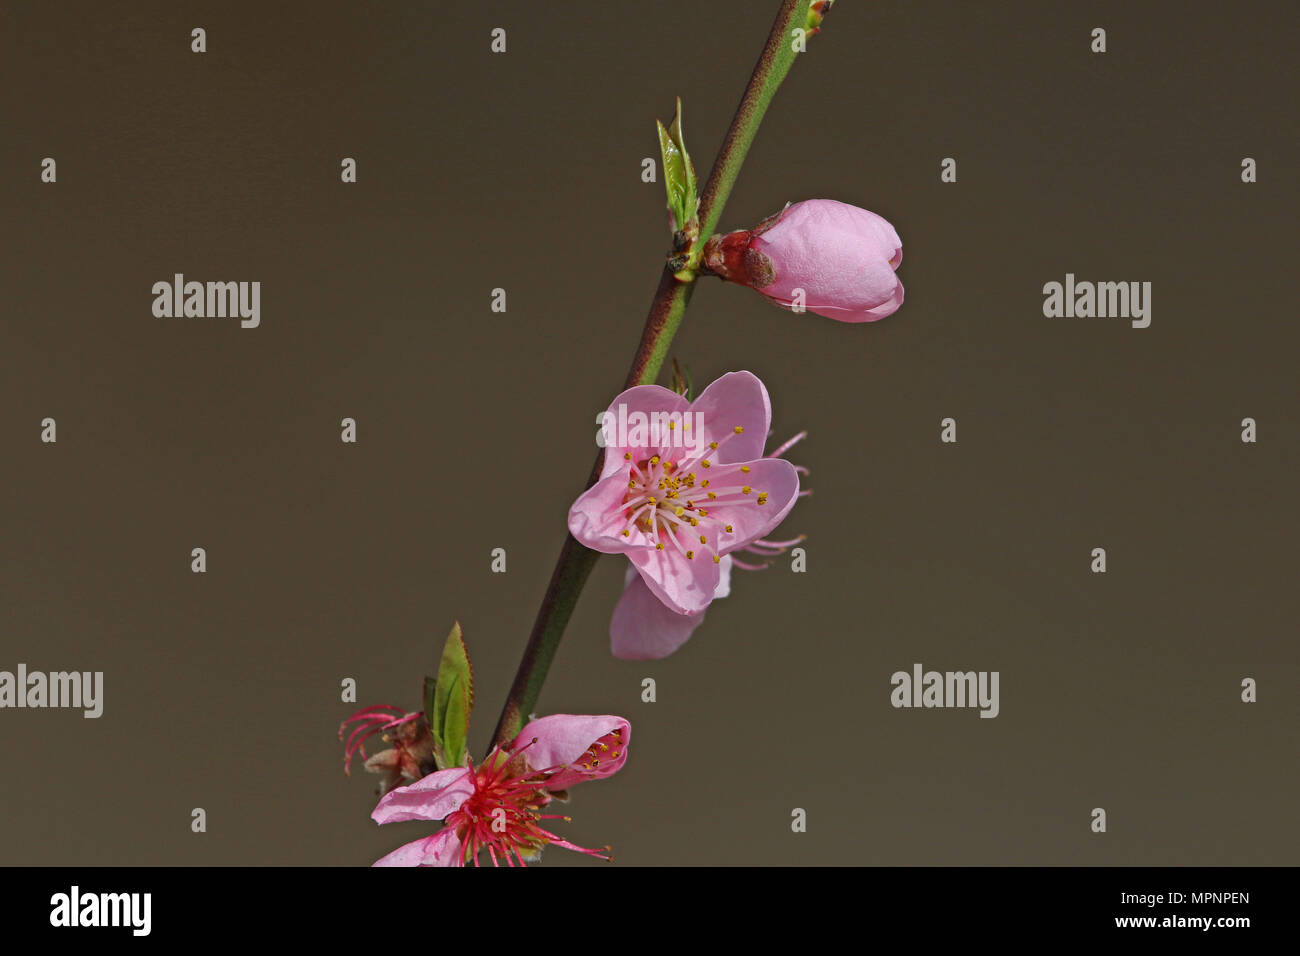 pink peach blossom and red bark Latin name prunus persica family rosaceae in Italy state symbol of Alabama, Delaware, Georgia and South Carolina Stock Photo